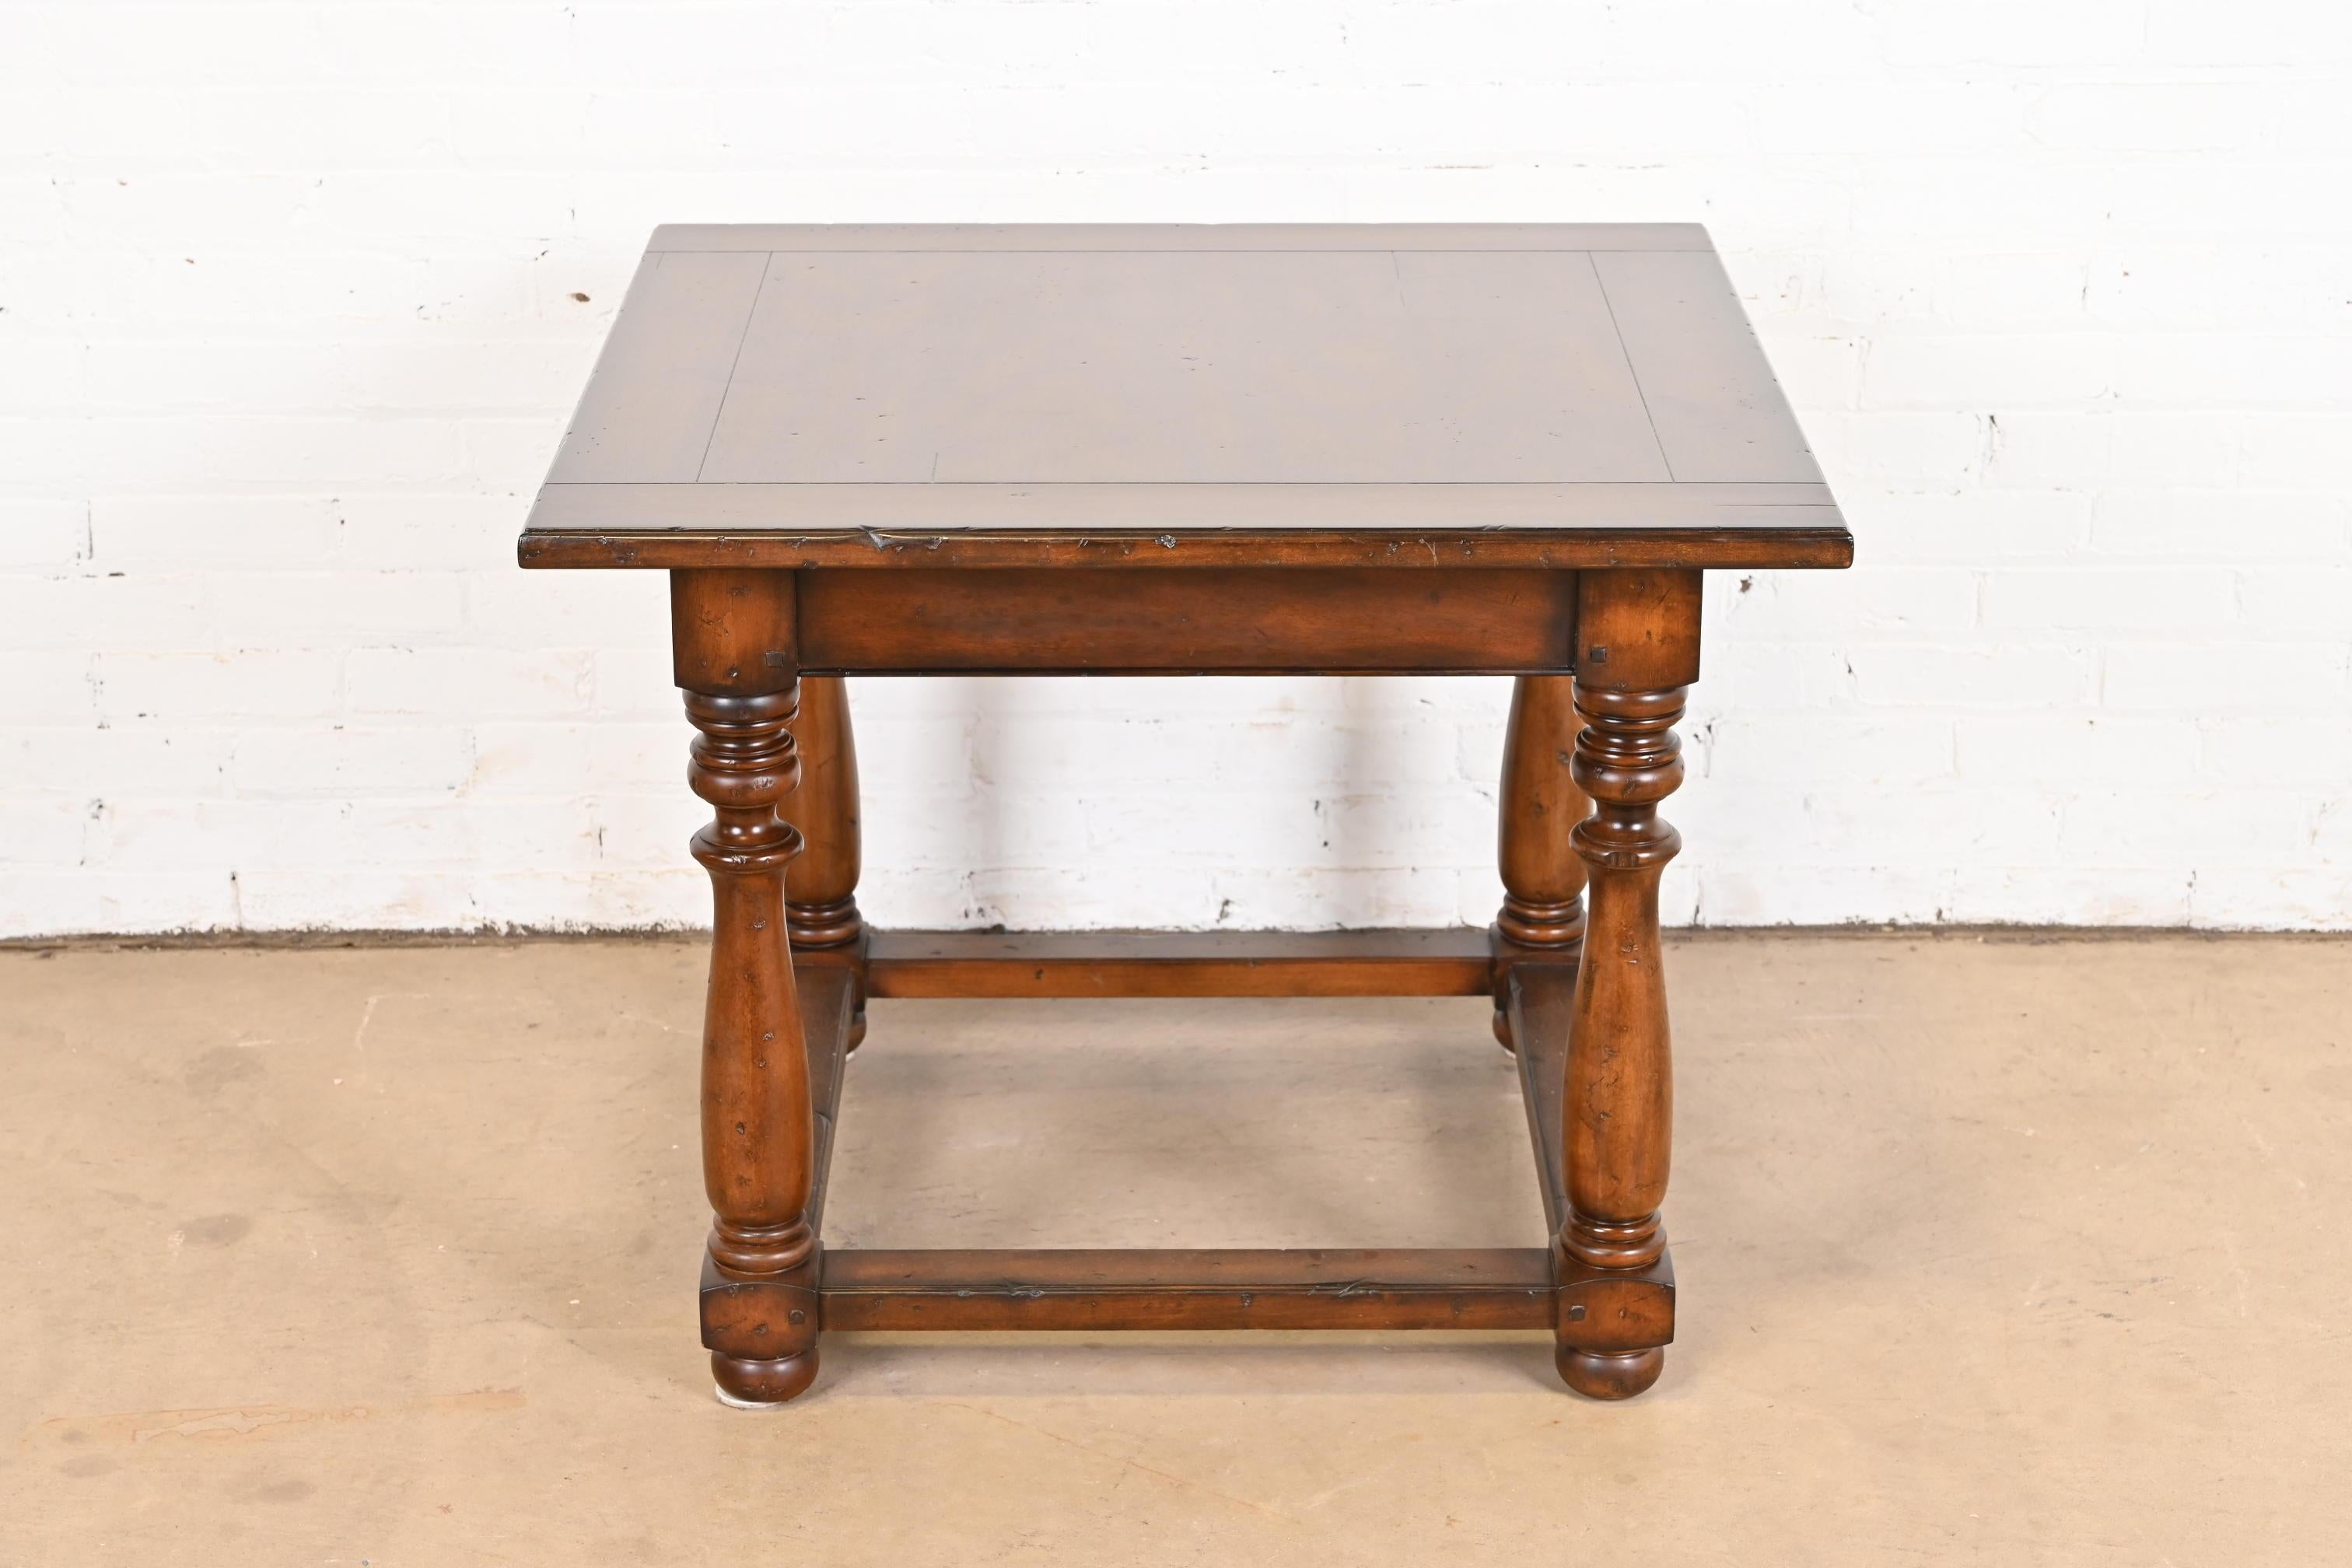 A gorgeous Rustic European style carved walnut occasional side table or tea table with turned legs

By Ralph Lauren

Circa 1990s

Measures: 33